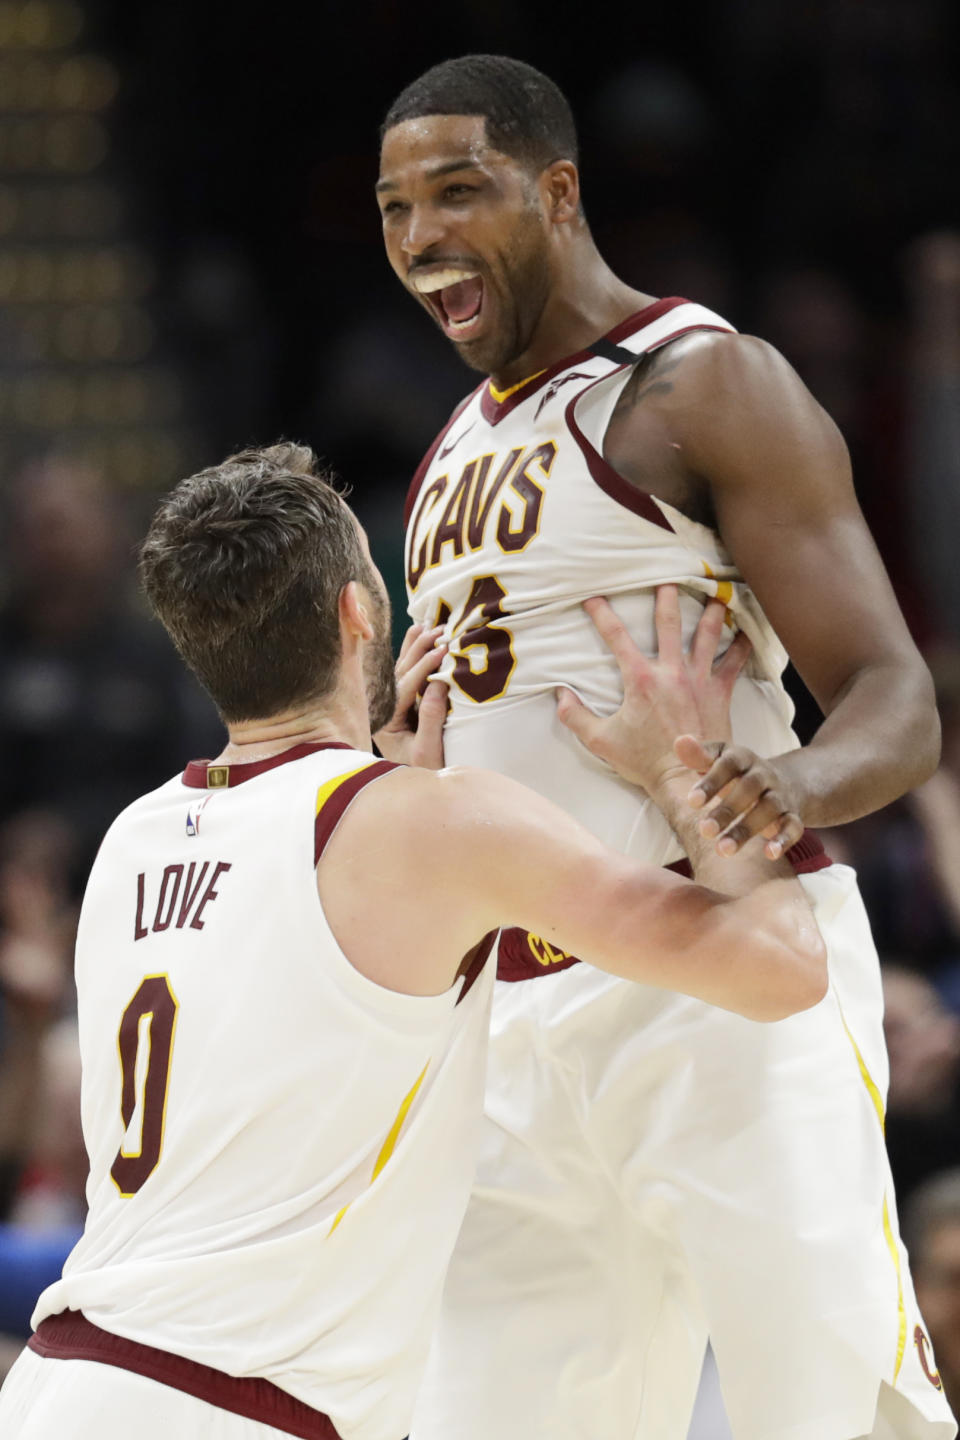 Cleveland Cavaliers' Tristan Thompson (13) and Kevin Love (0) celebrate after they defeated the Miami Heat in overtime in an NBA basketball game, Monday, Feb. 24, 2020, in Cleveland. (AP Photo/Tony Dejak)